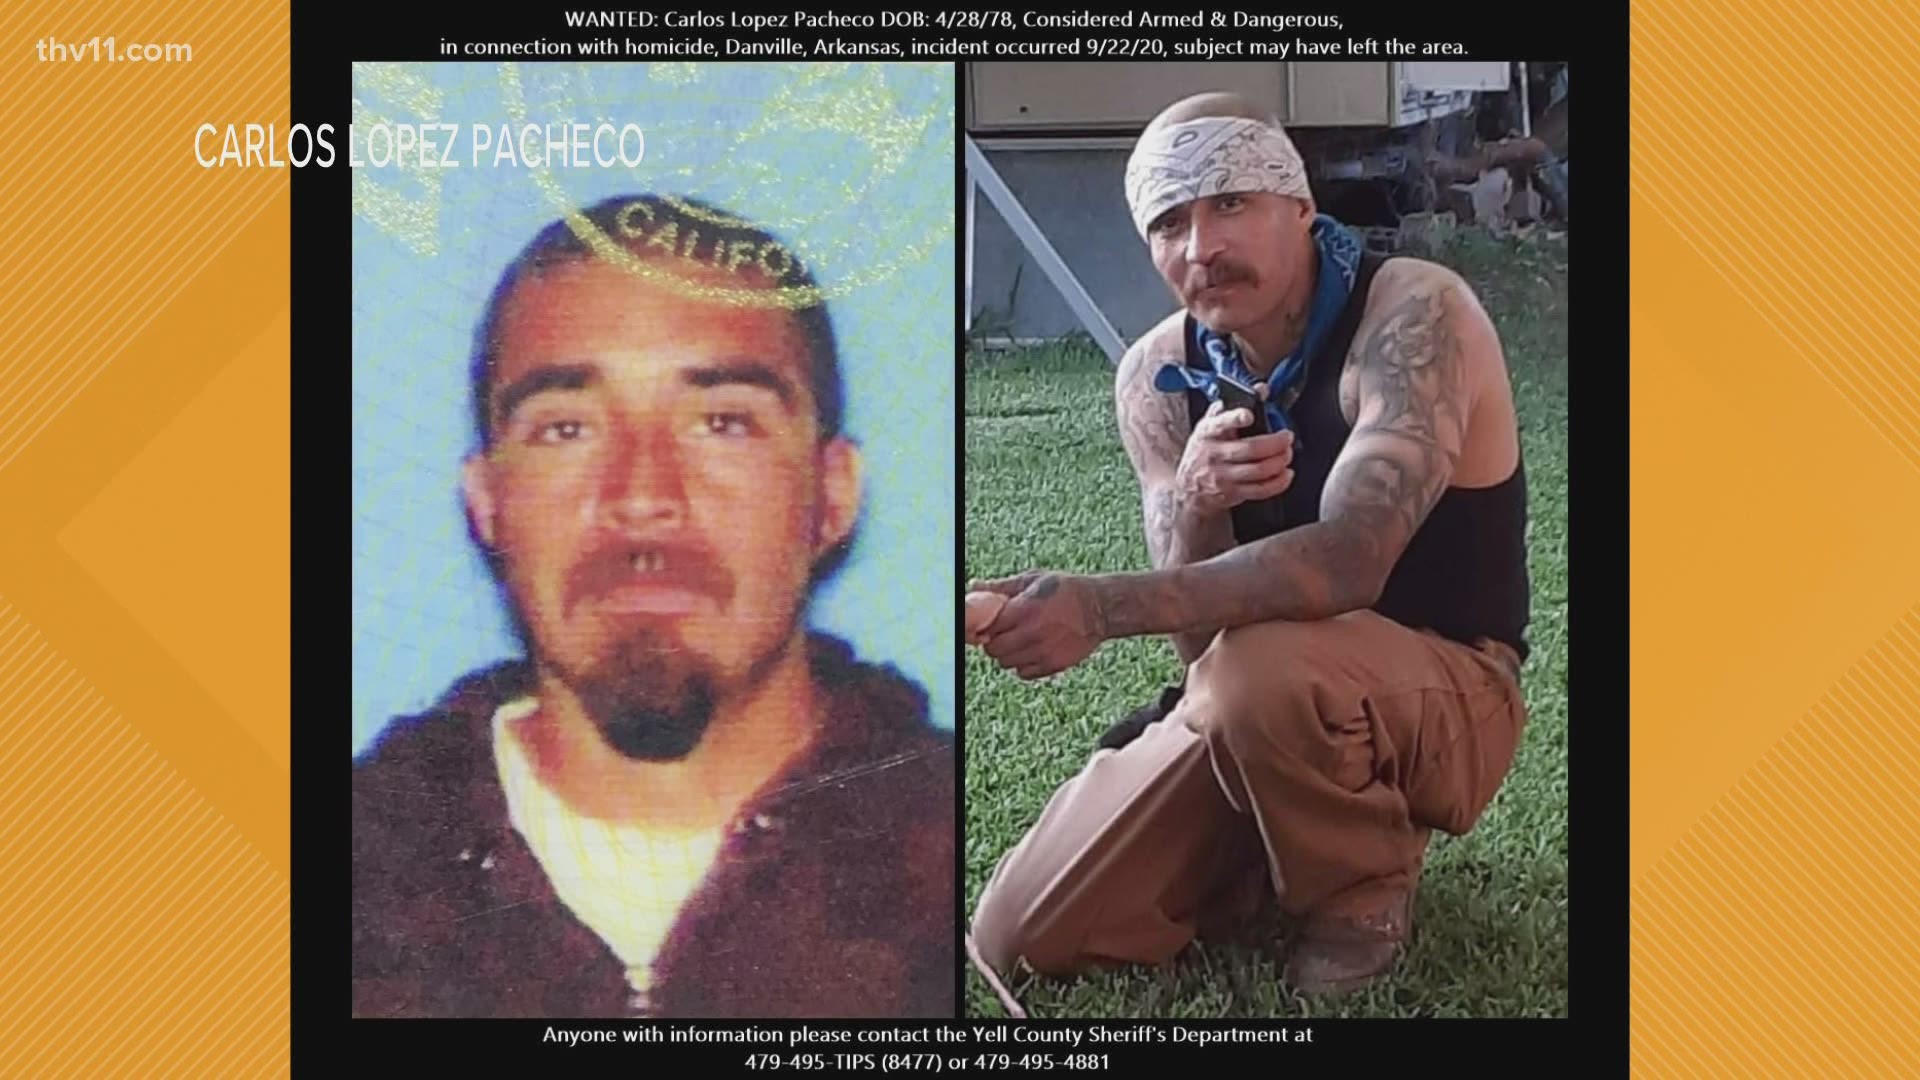 The Yell County Sheriff's Department, Danville police and Arkansas State Police need your help finding this man.